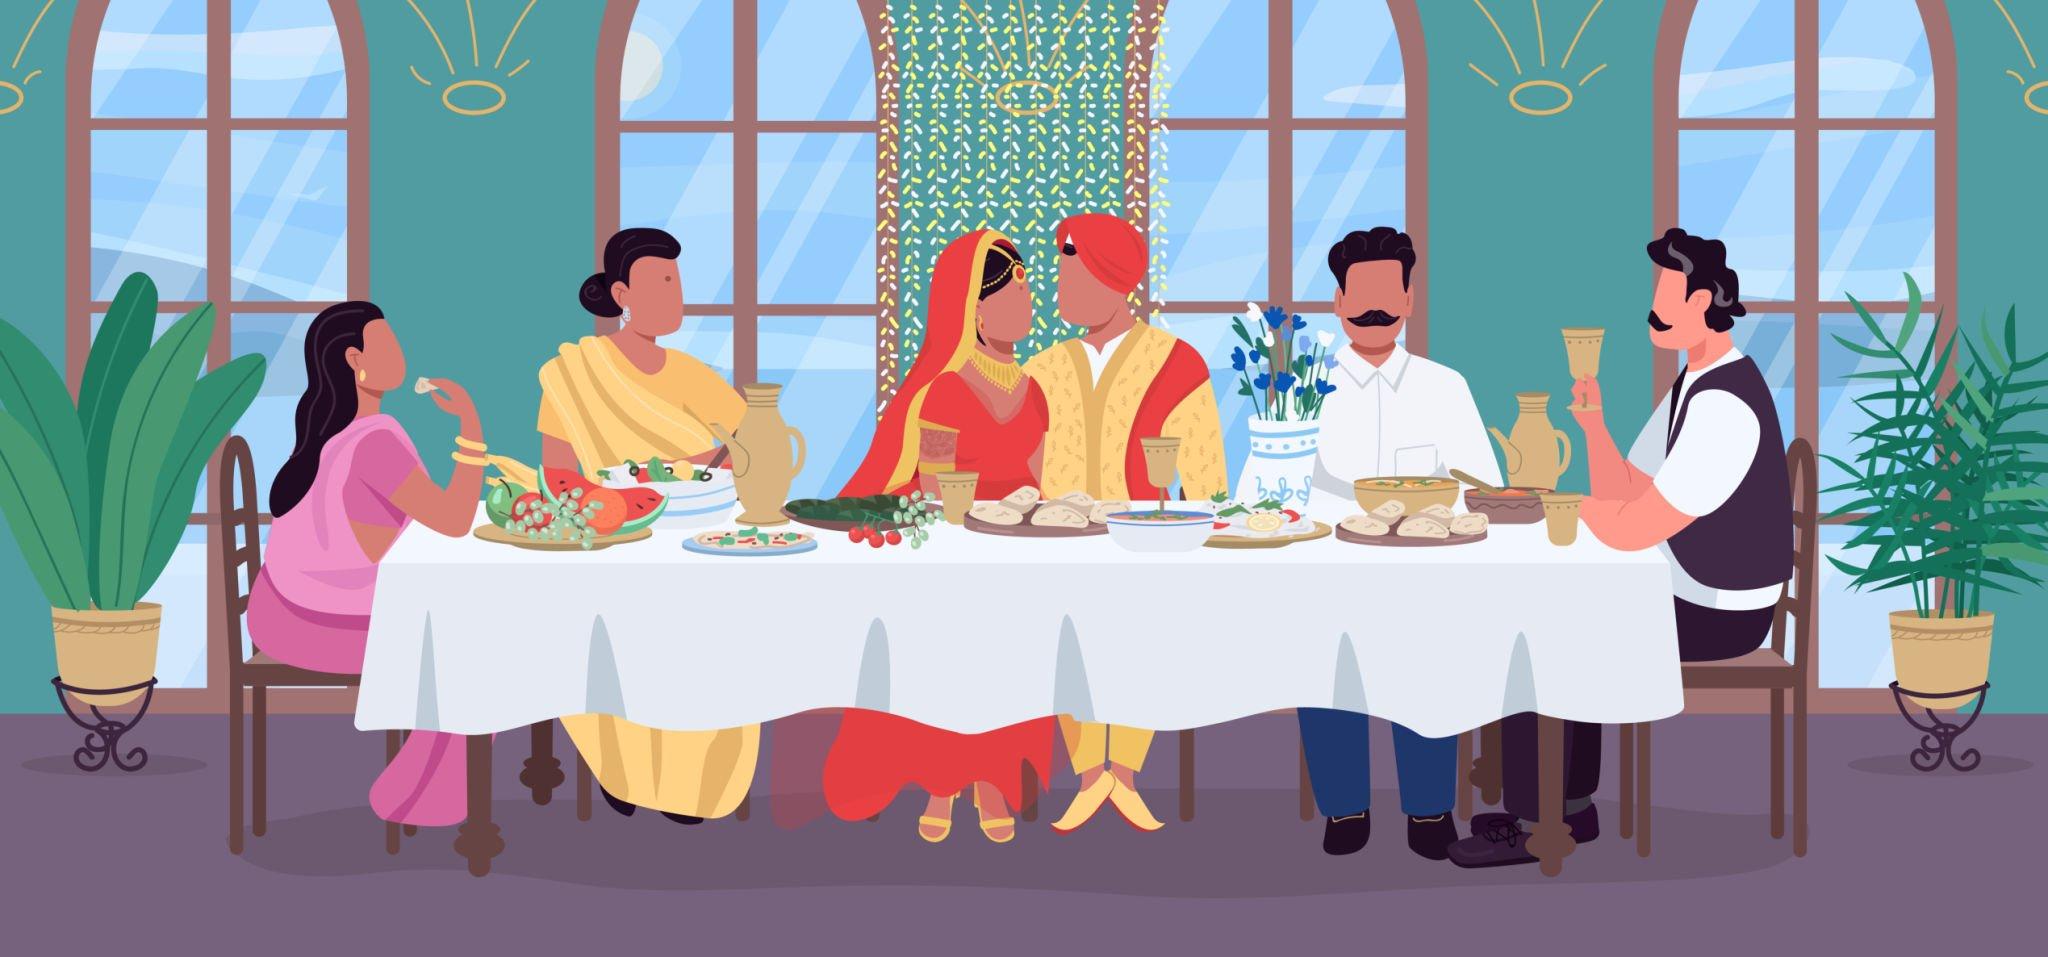 A vector image showing wedding in Ludhiana Punjab